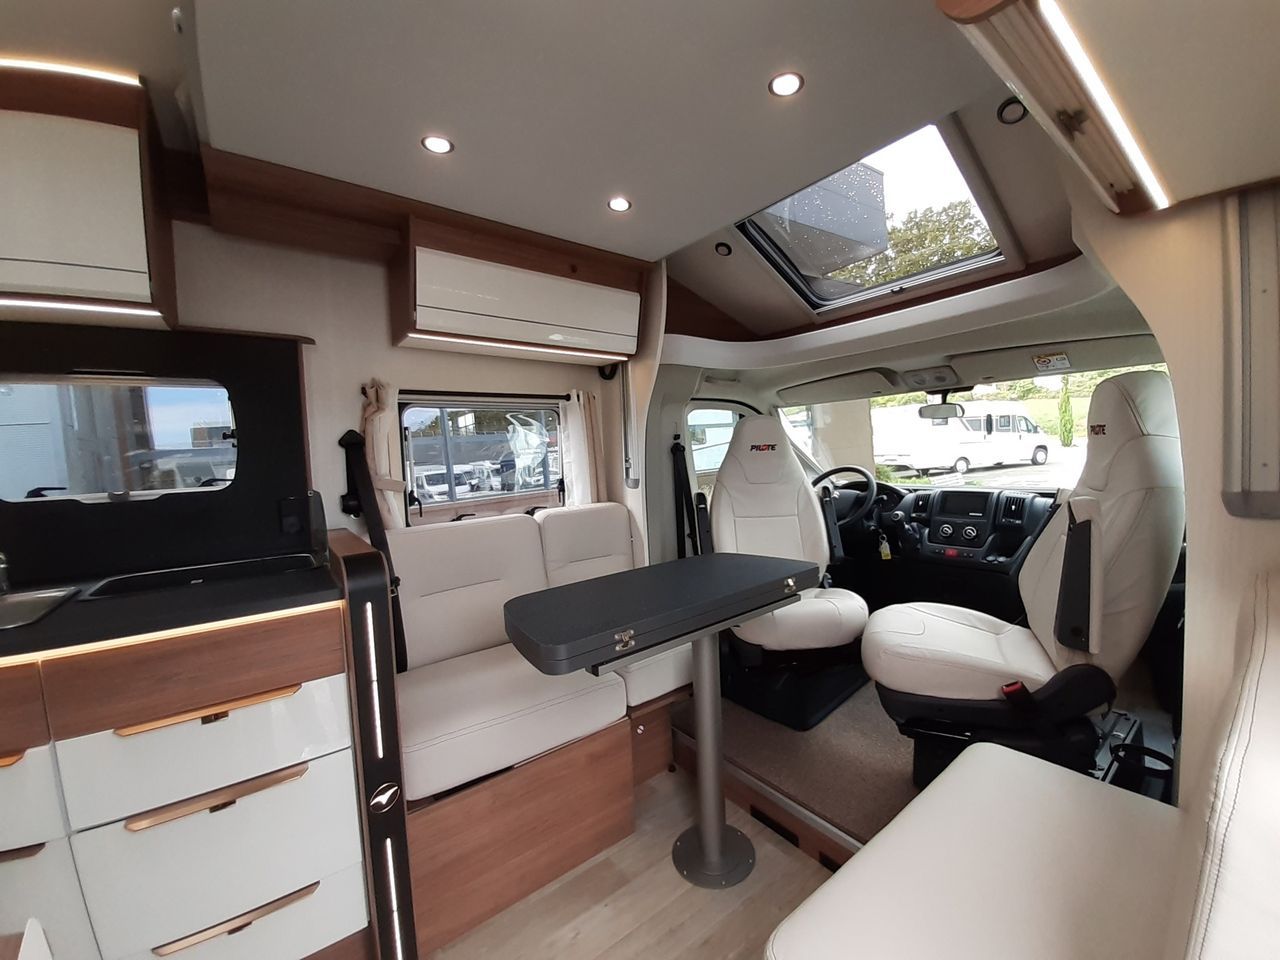 Camping-car - Pilote - P726 FC EVIDENCE 2 000€ D'ACCESSOIRES OFFERTS - 2024